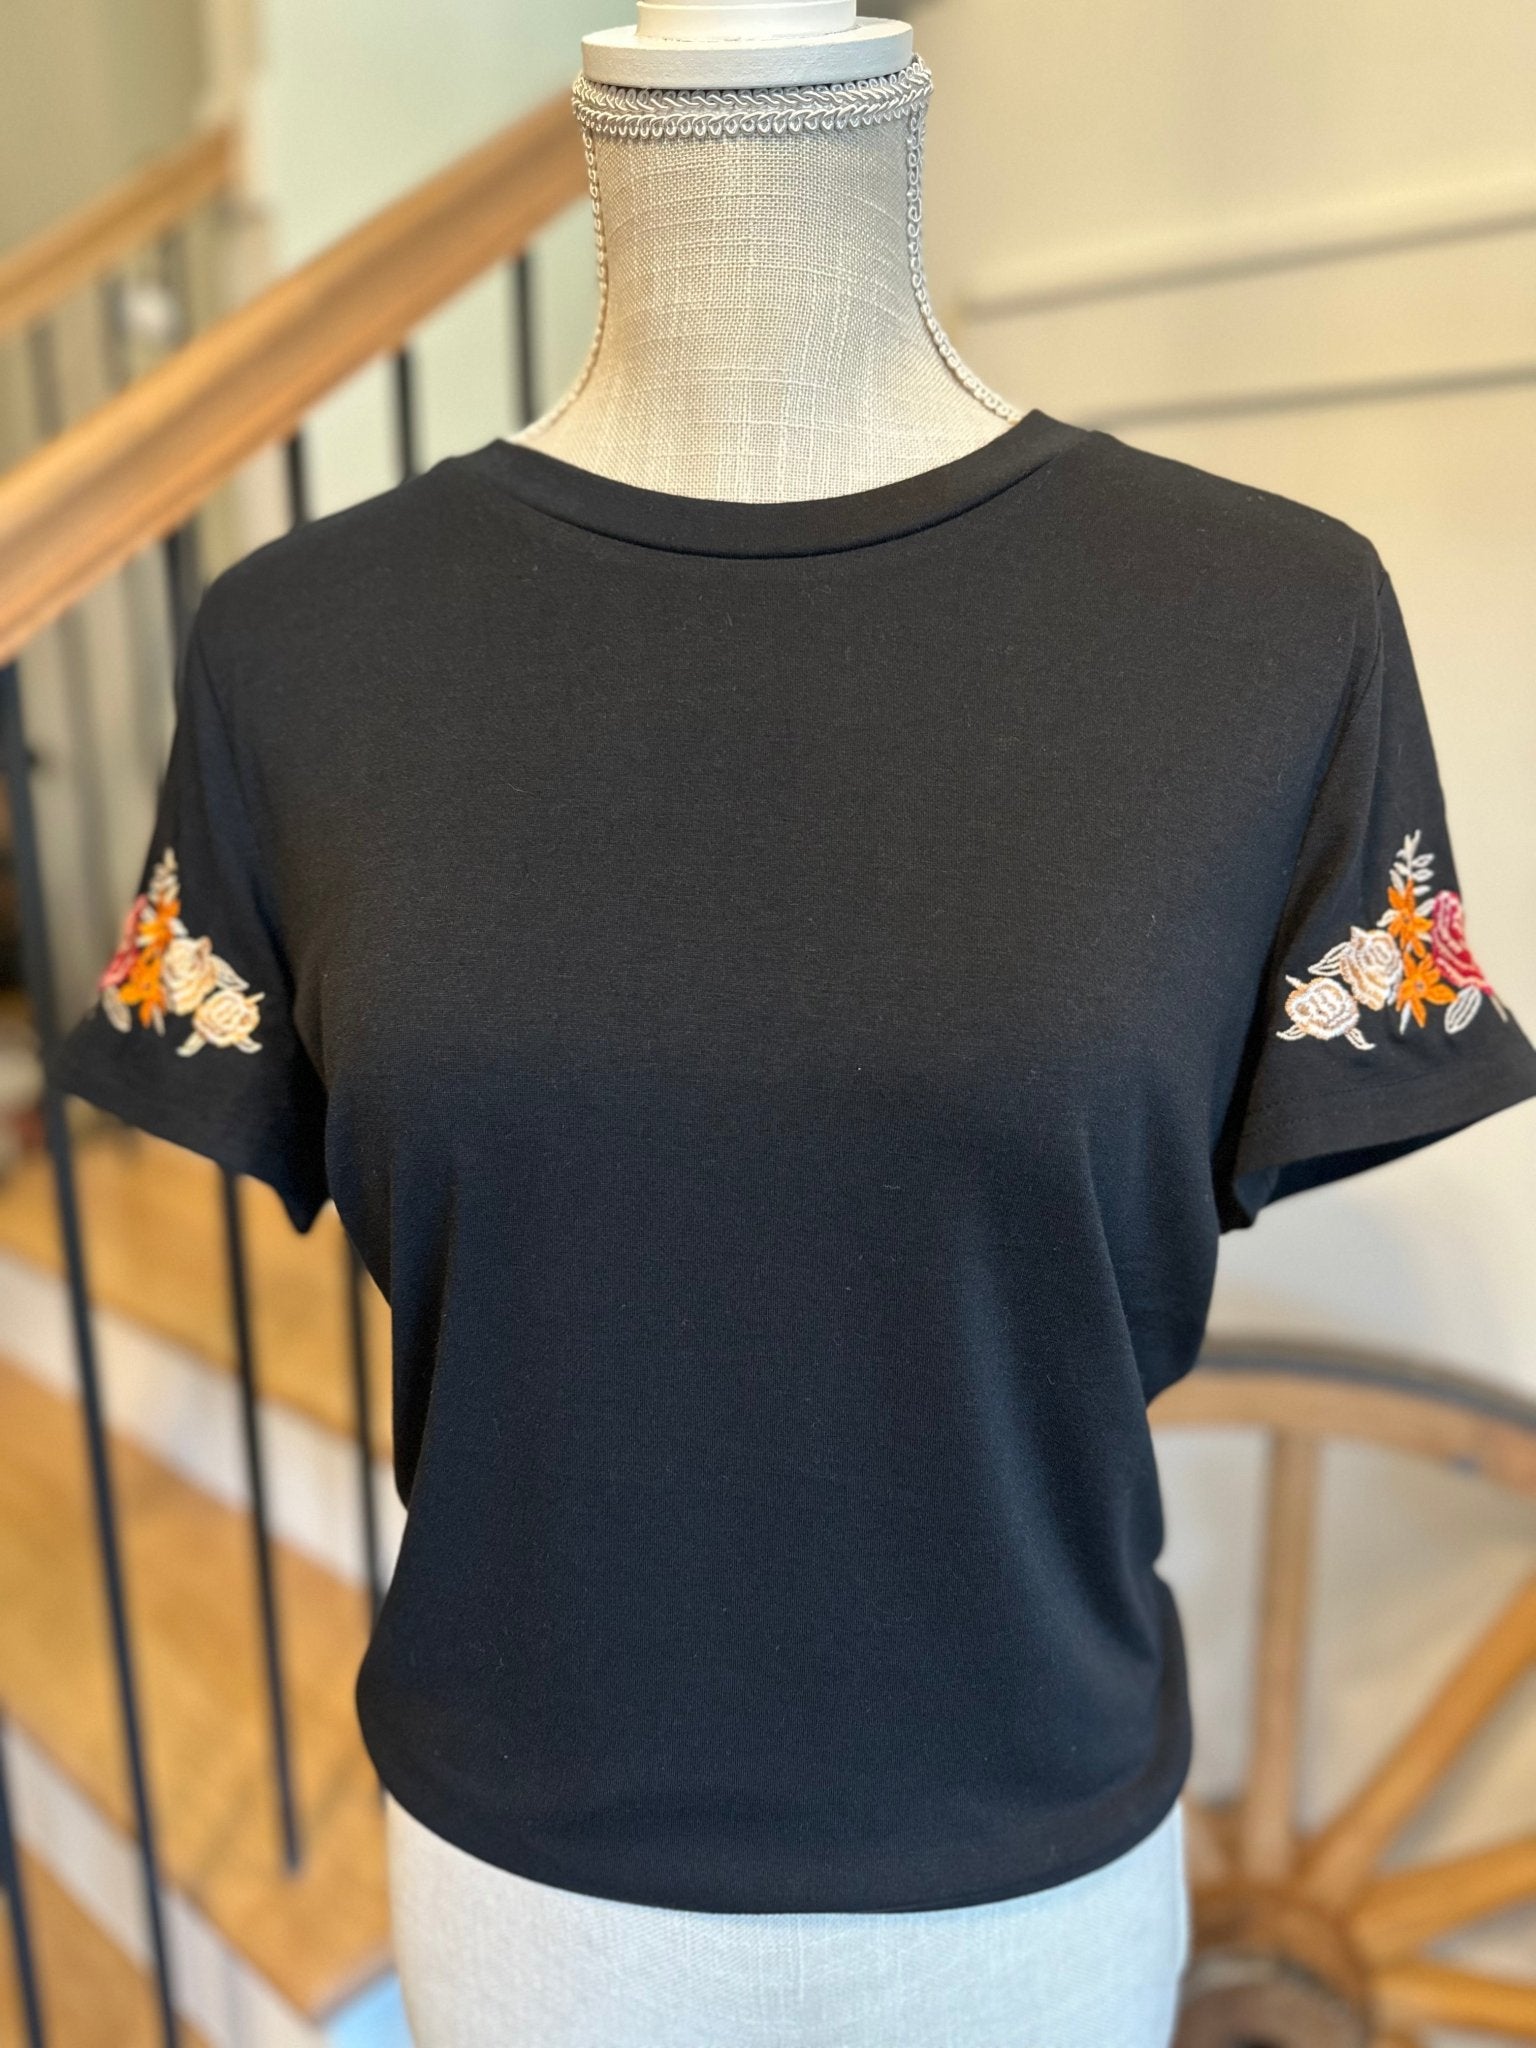 Black Floral Embroidered Sleeve Top - Mercantile213